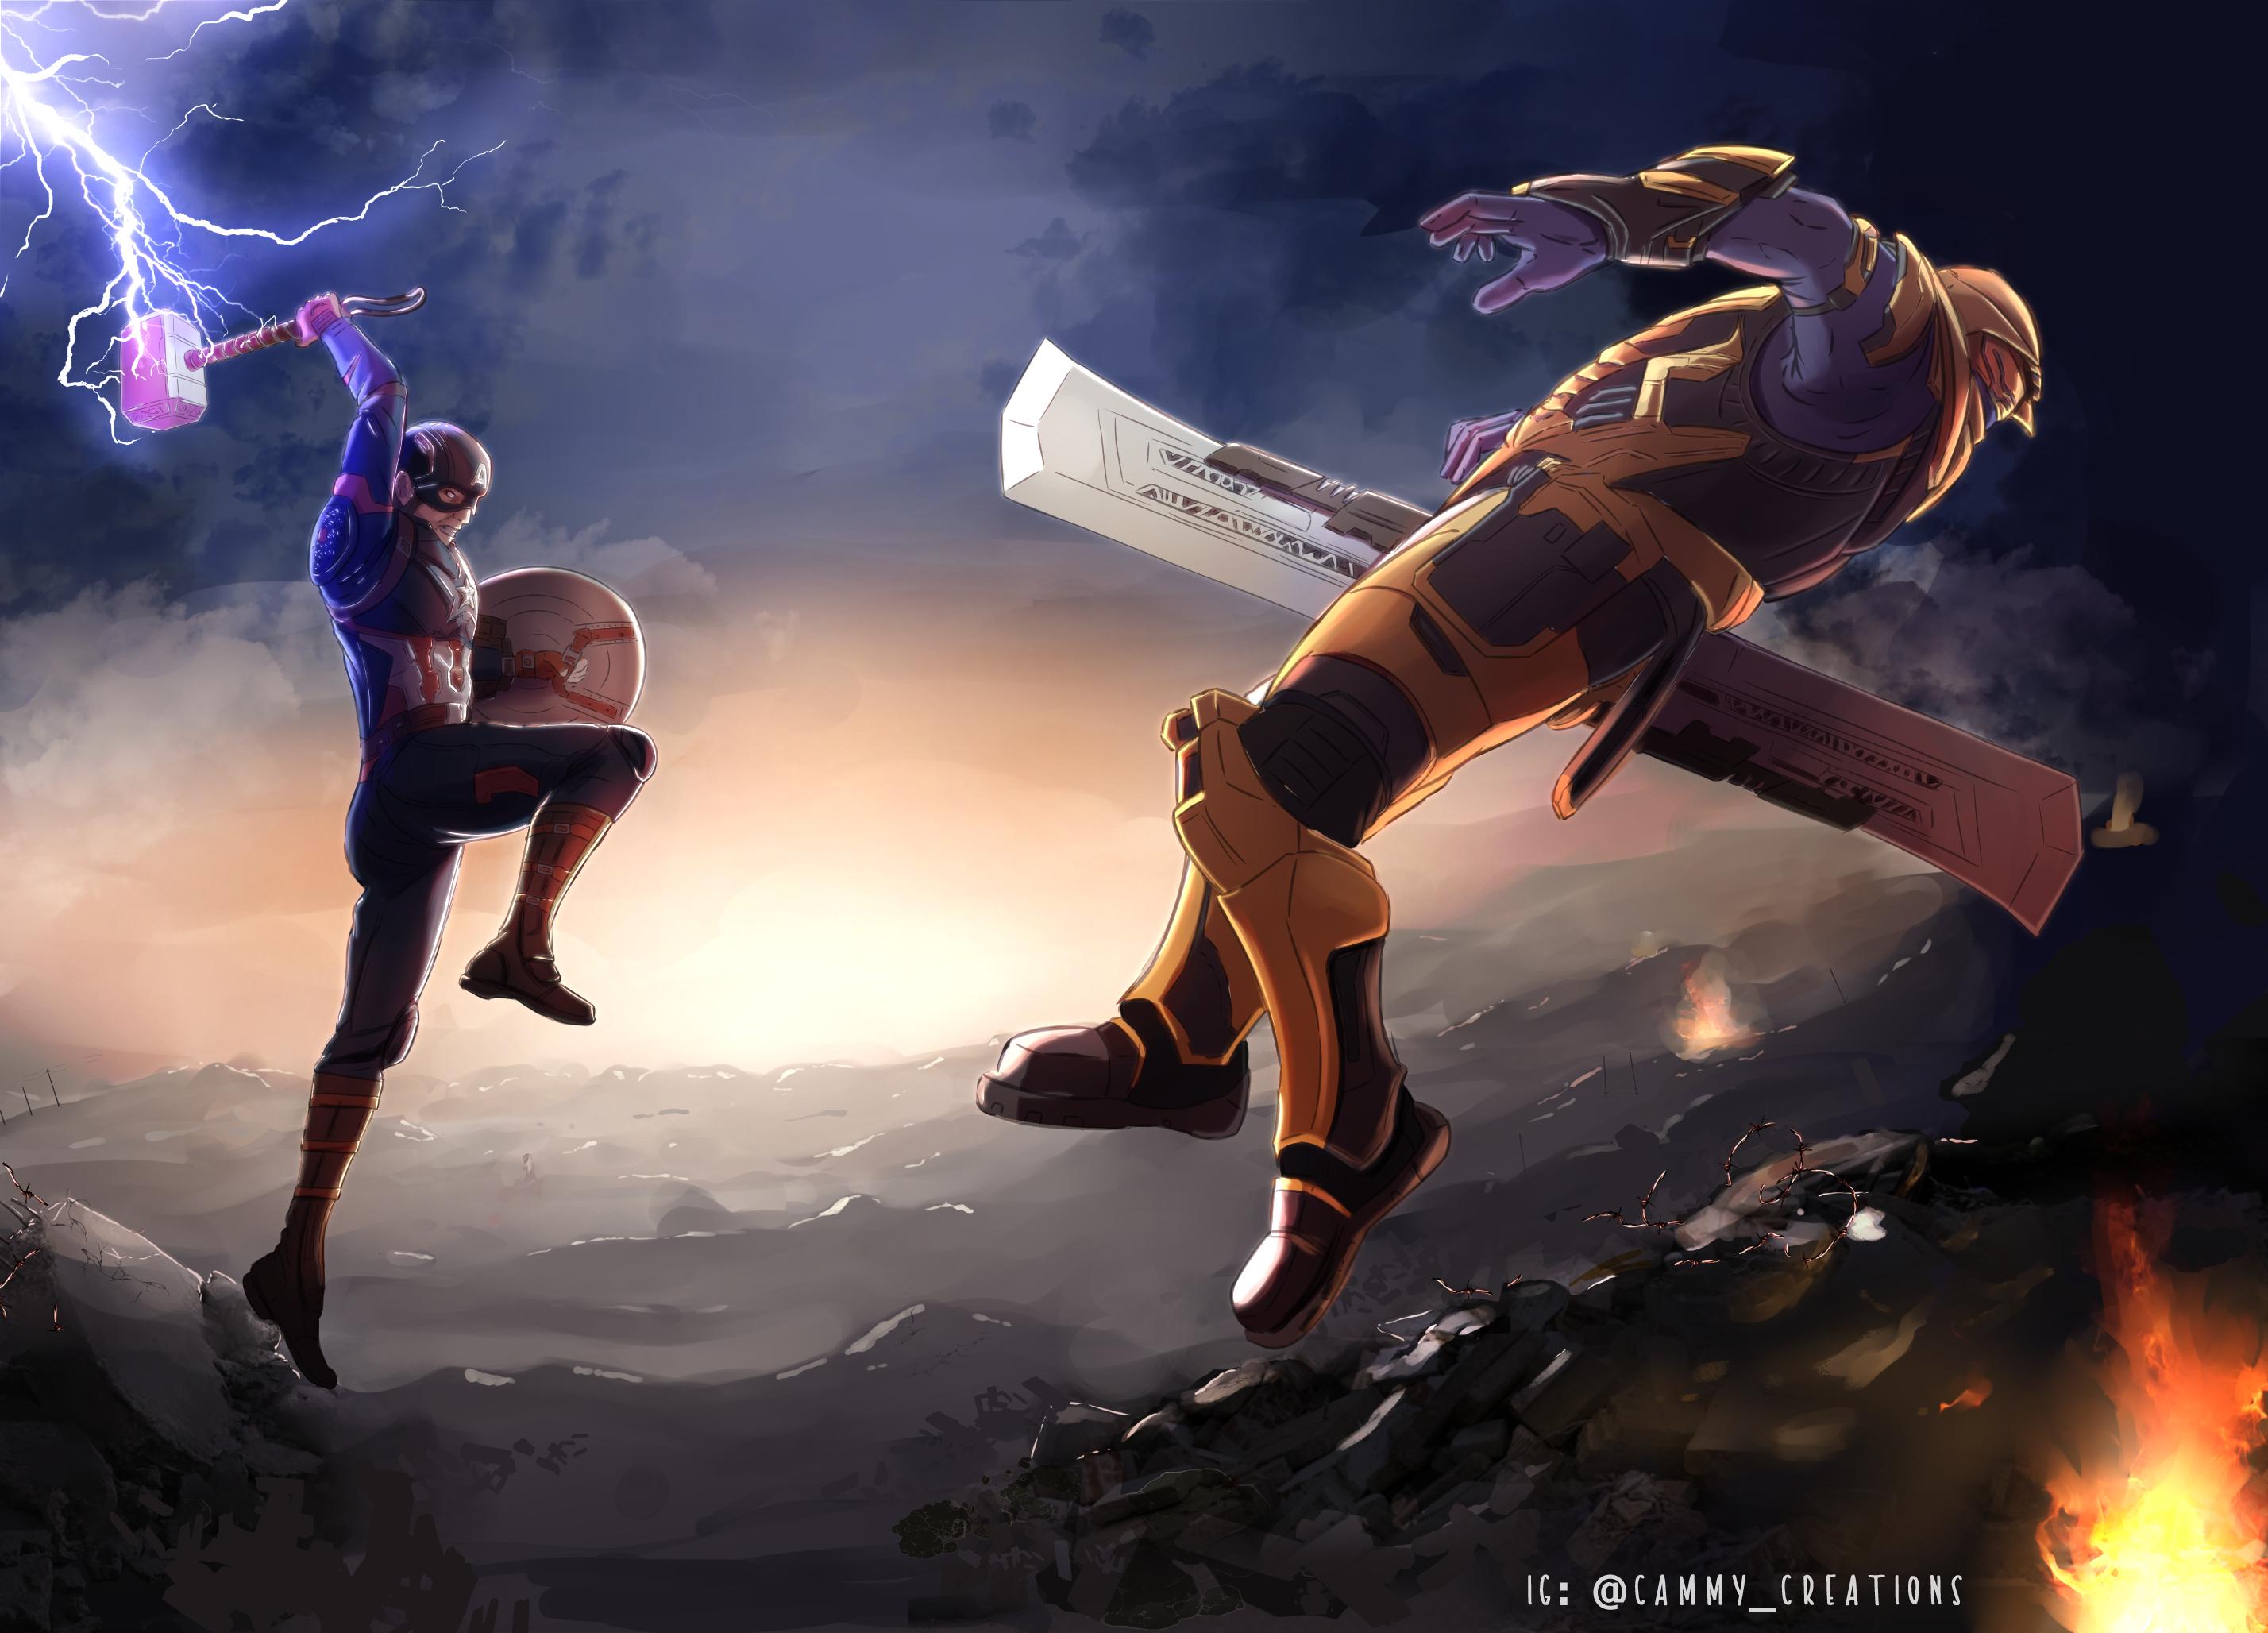 Captain America Fighting Thanos, HD Superheroes, 4k Wallpapers, Images